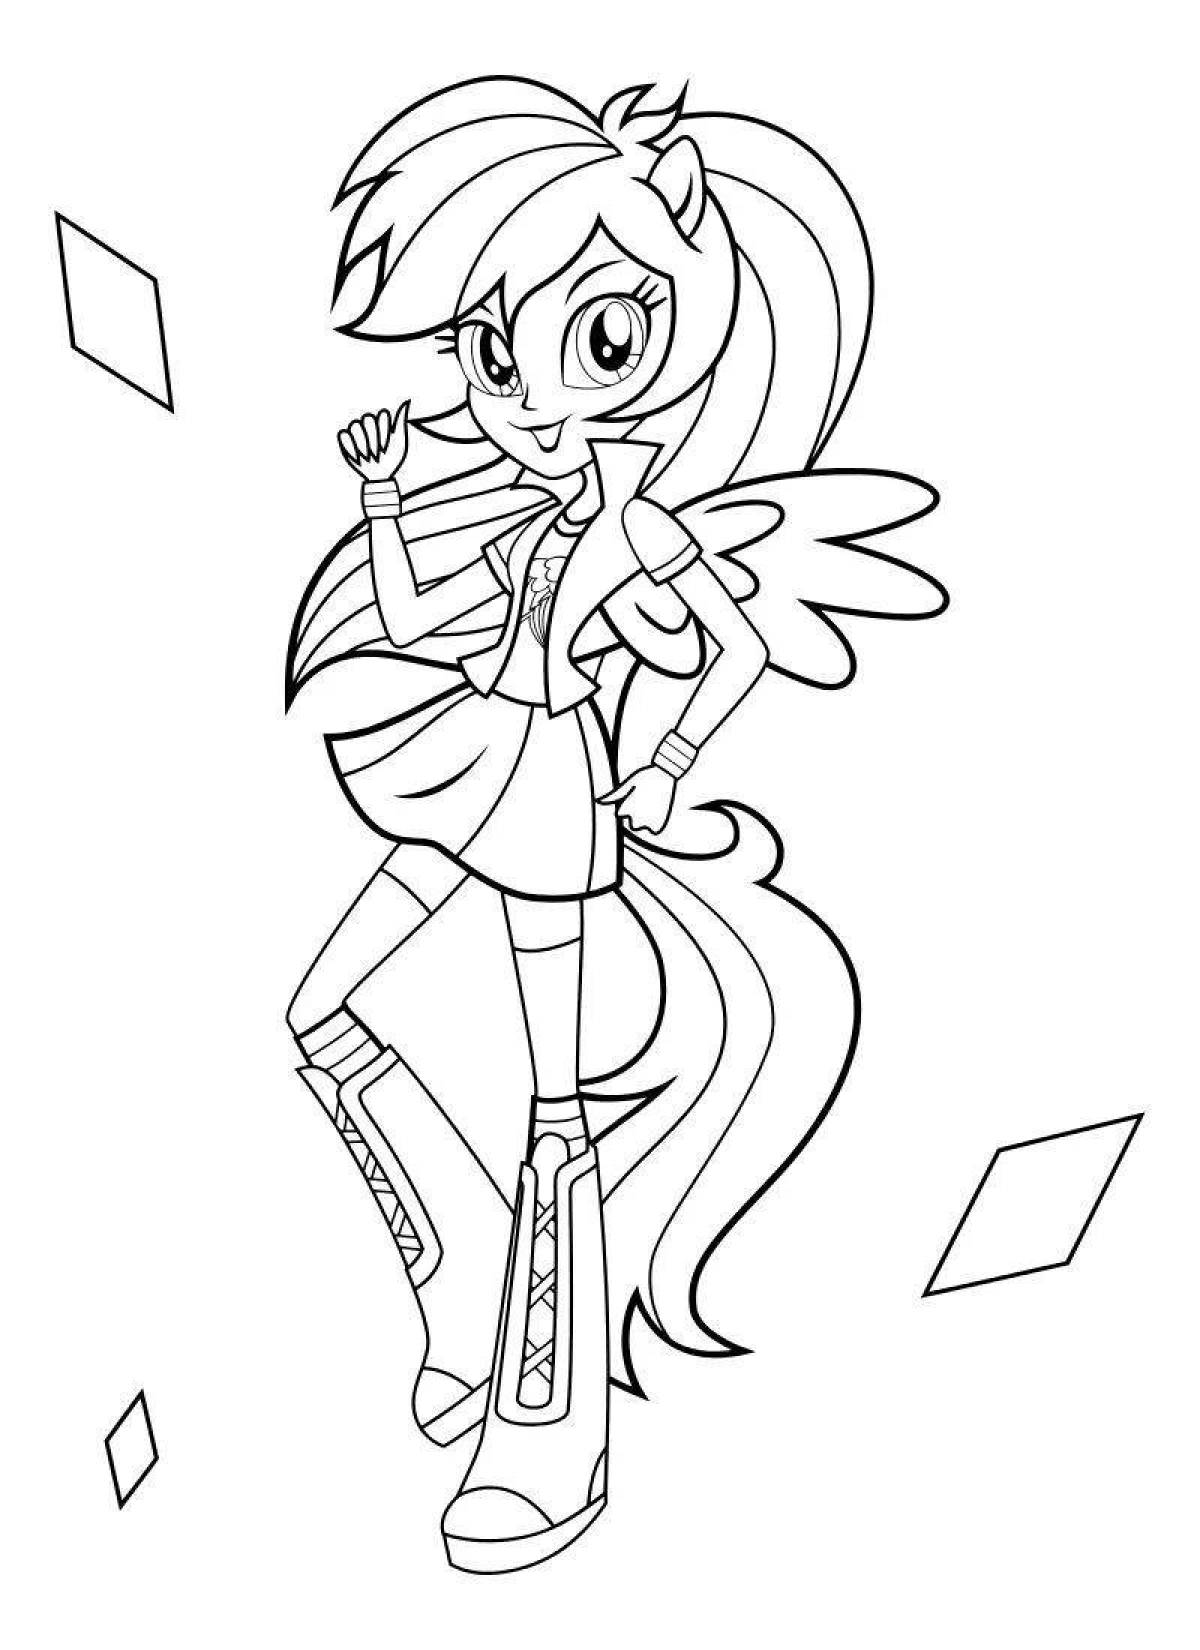 Fun equestria girls coloring pages